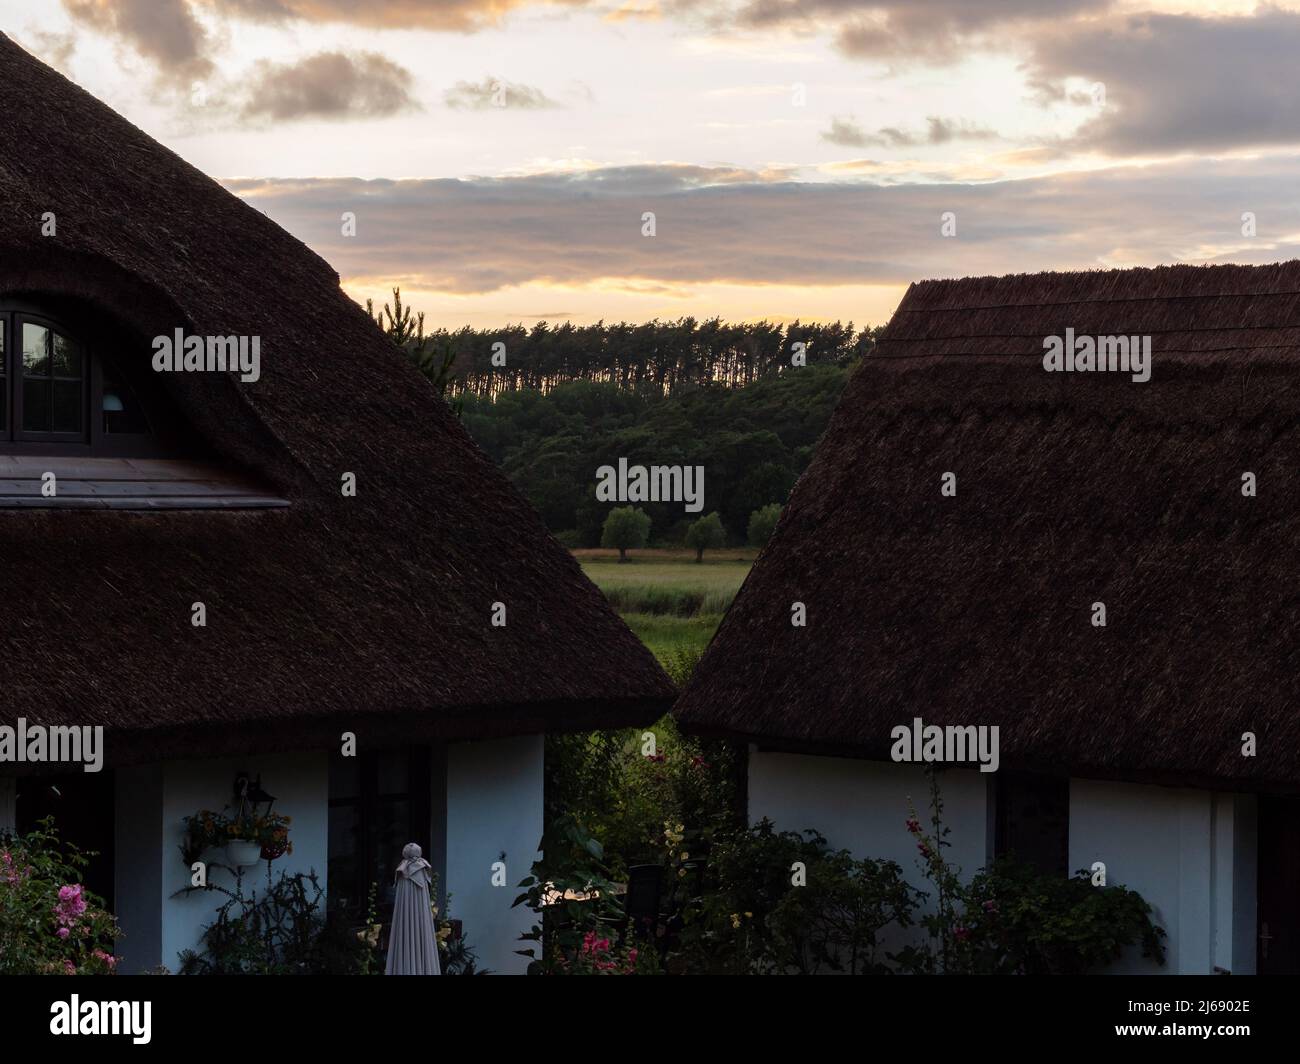 Beautiful sunset sky behind two houses with thatched roofs. Idyllic nature on Rügen island in Germany. Rural scene in the evening. Stock Photo